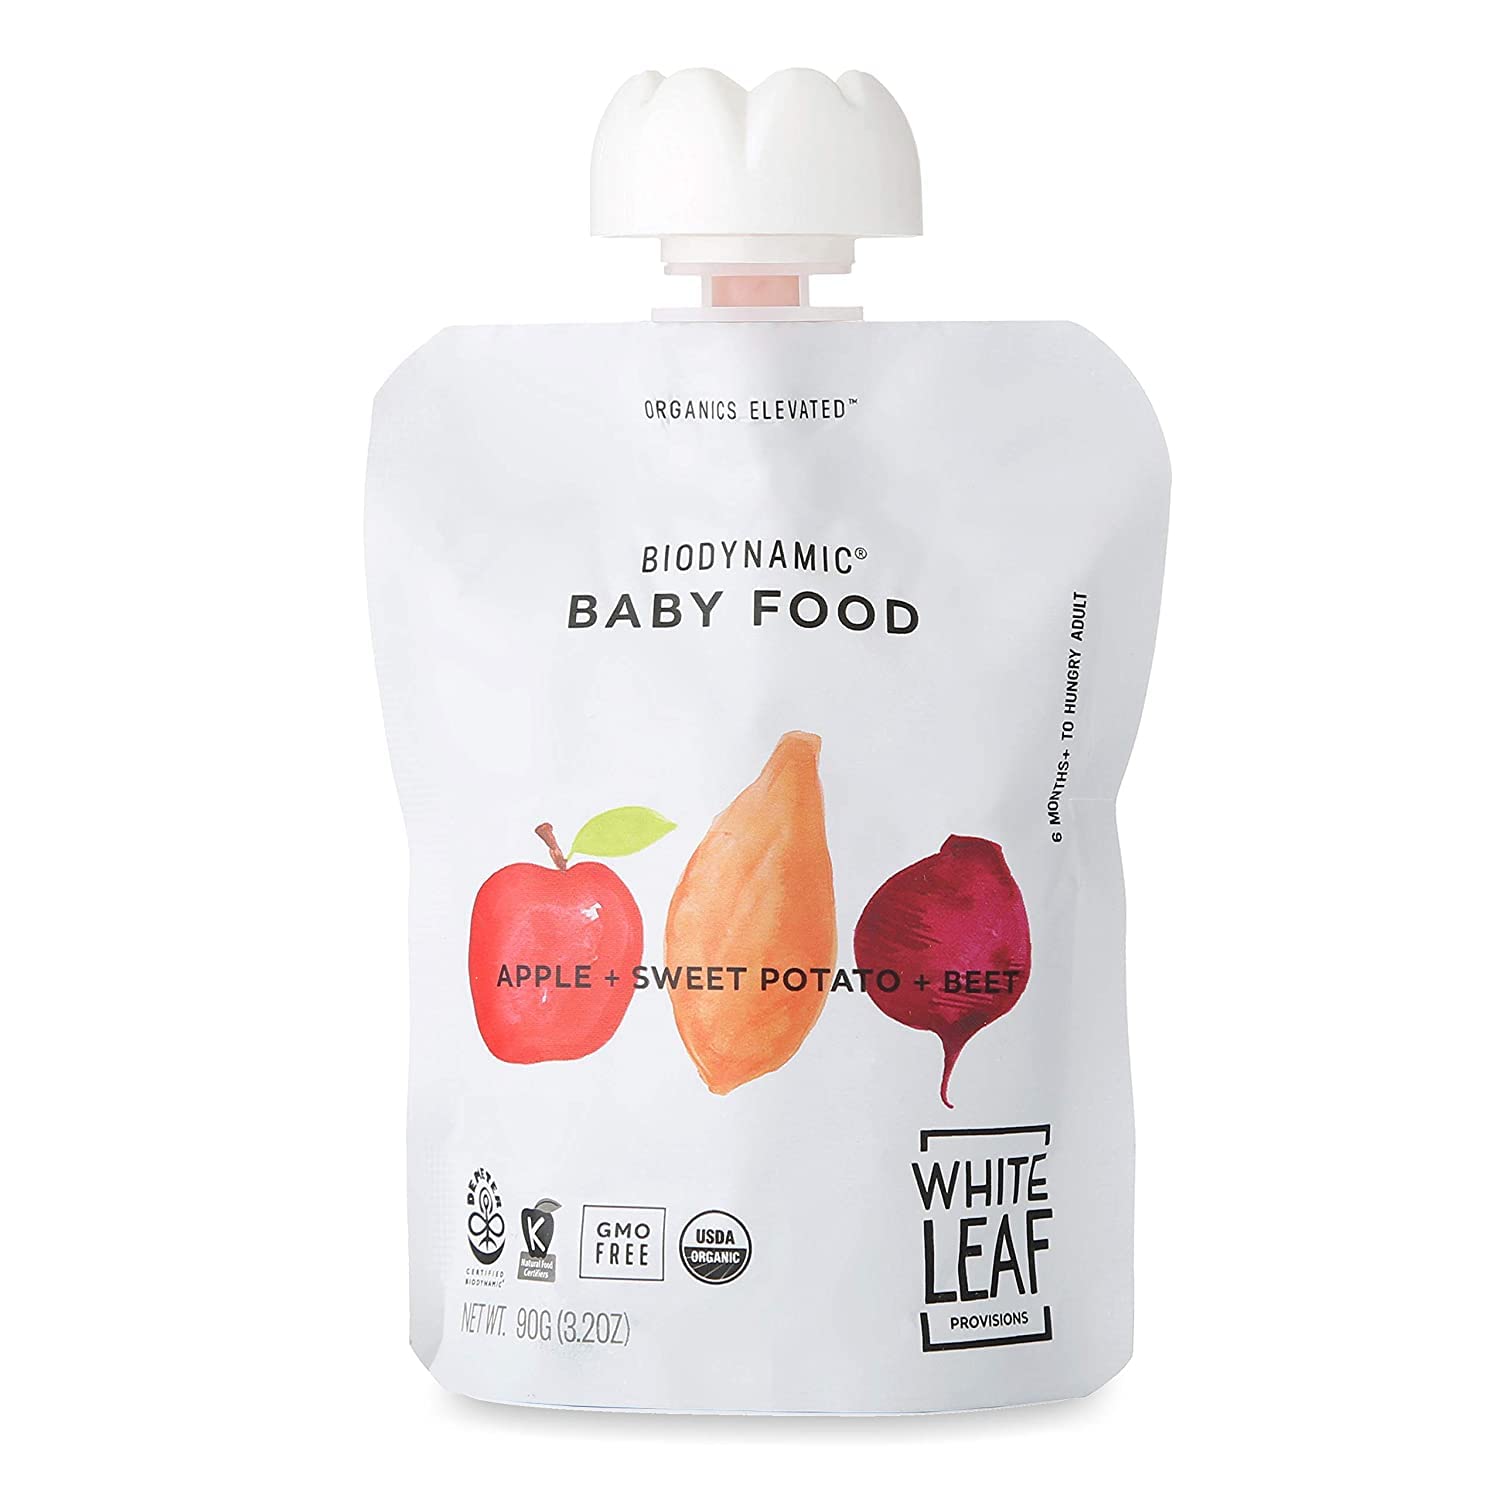 White Leaf Provisions Biodynamic & Organic Baby Food/Snacks — 12 x 3.17 Oz Apple, Sweet Potato & Beet Unsweetened Baby Puree Pouches — Squeezable Baby Food & Toddler Snack